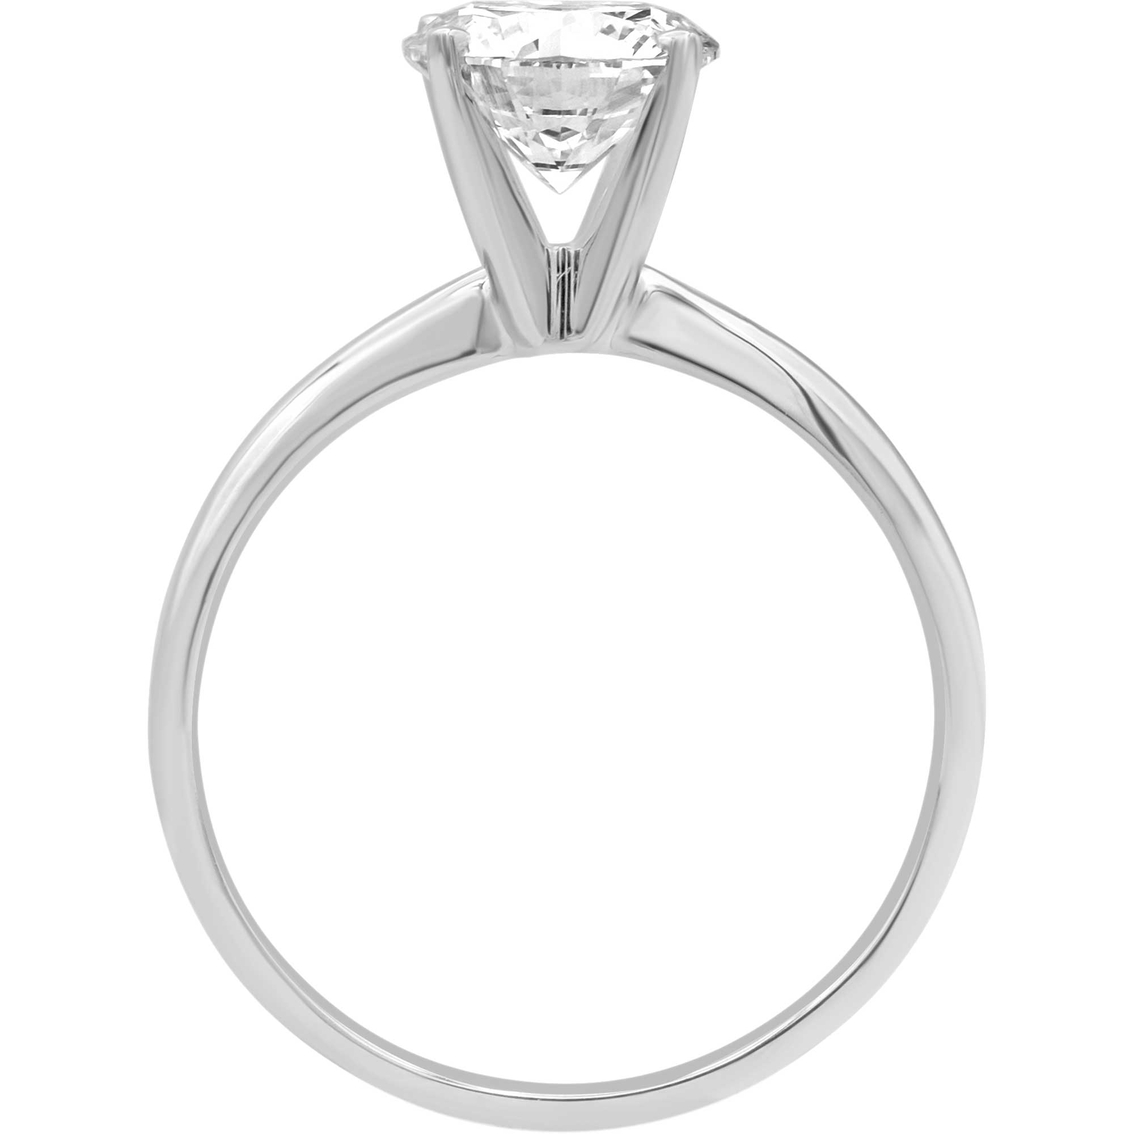 14K White Gold 1 CTW Diamond Solitaire Ring - Image 3 of 5